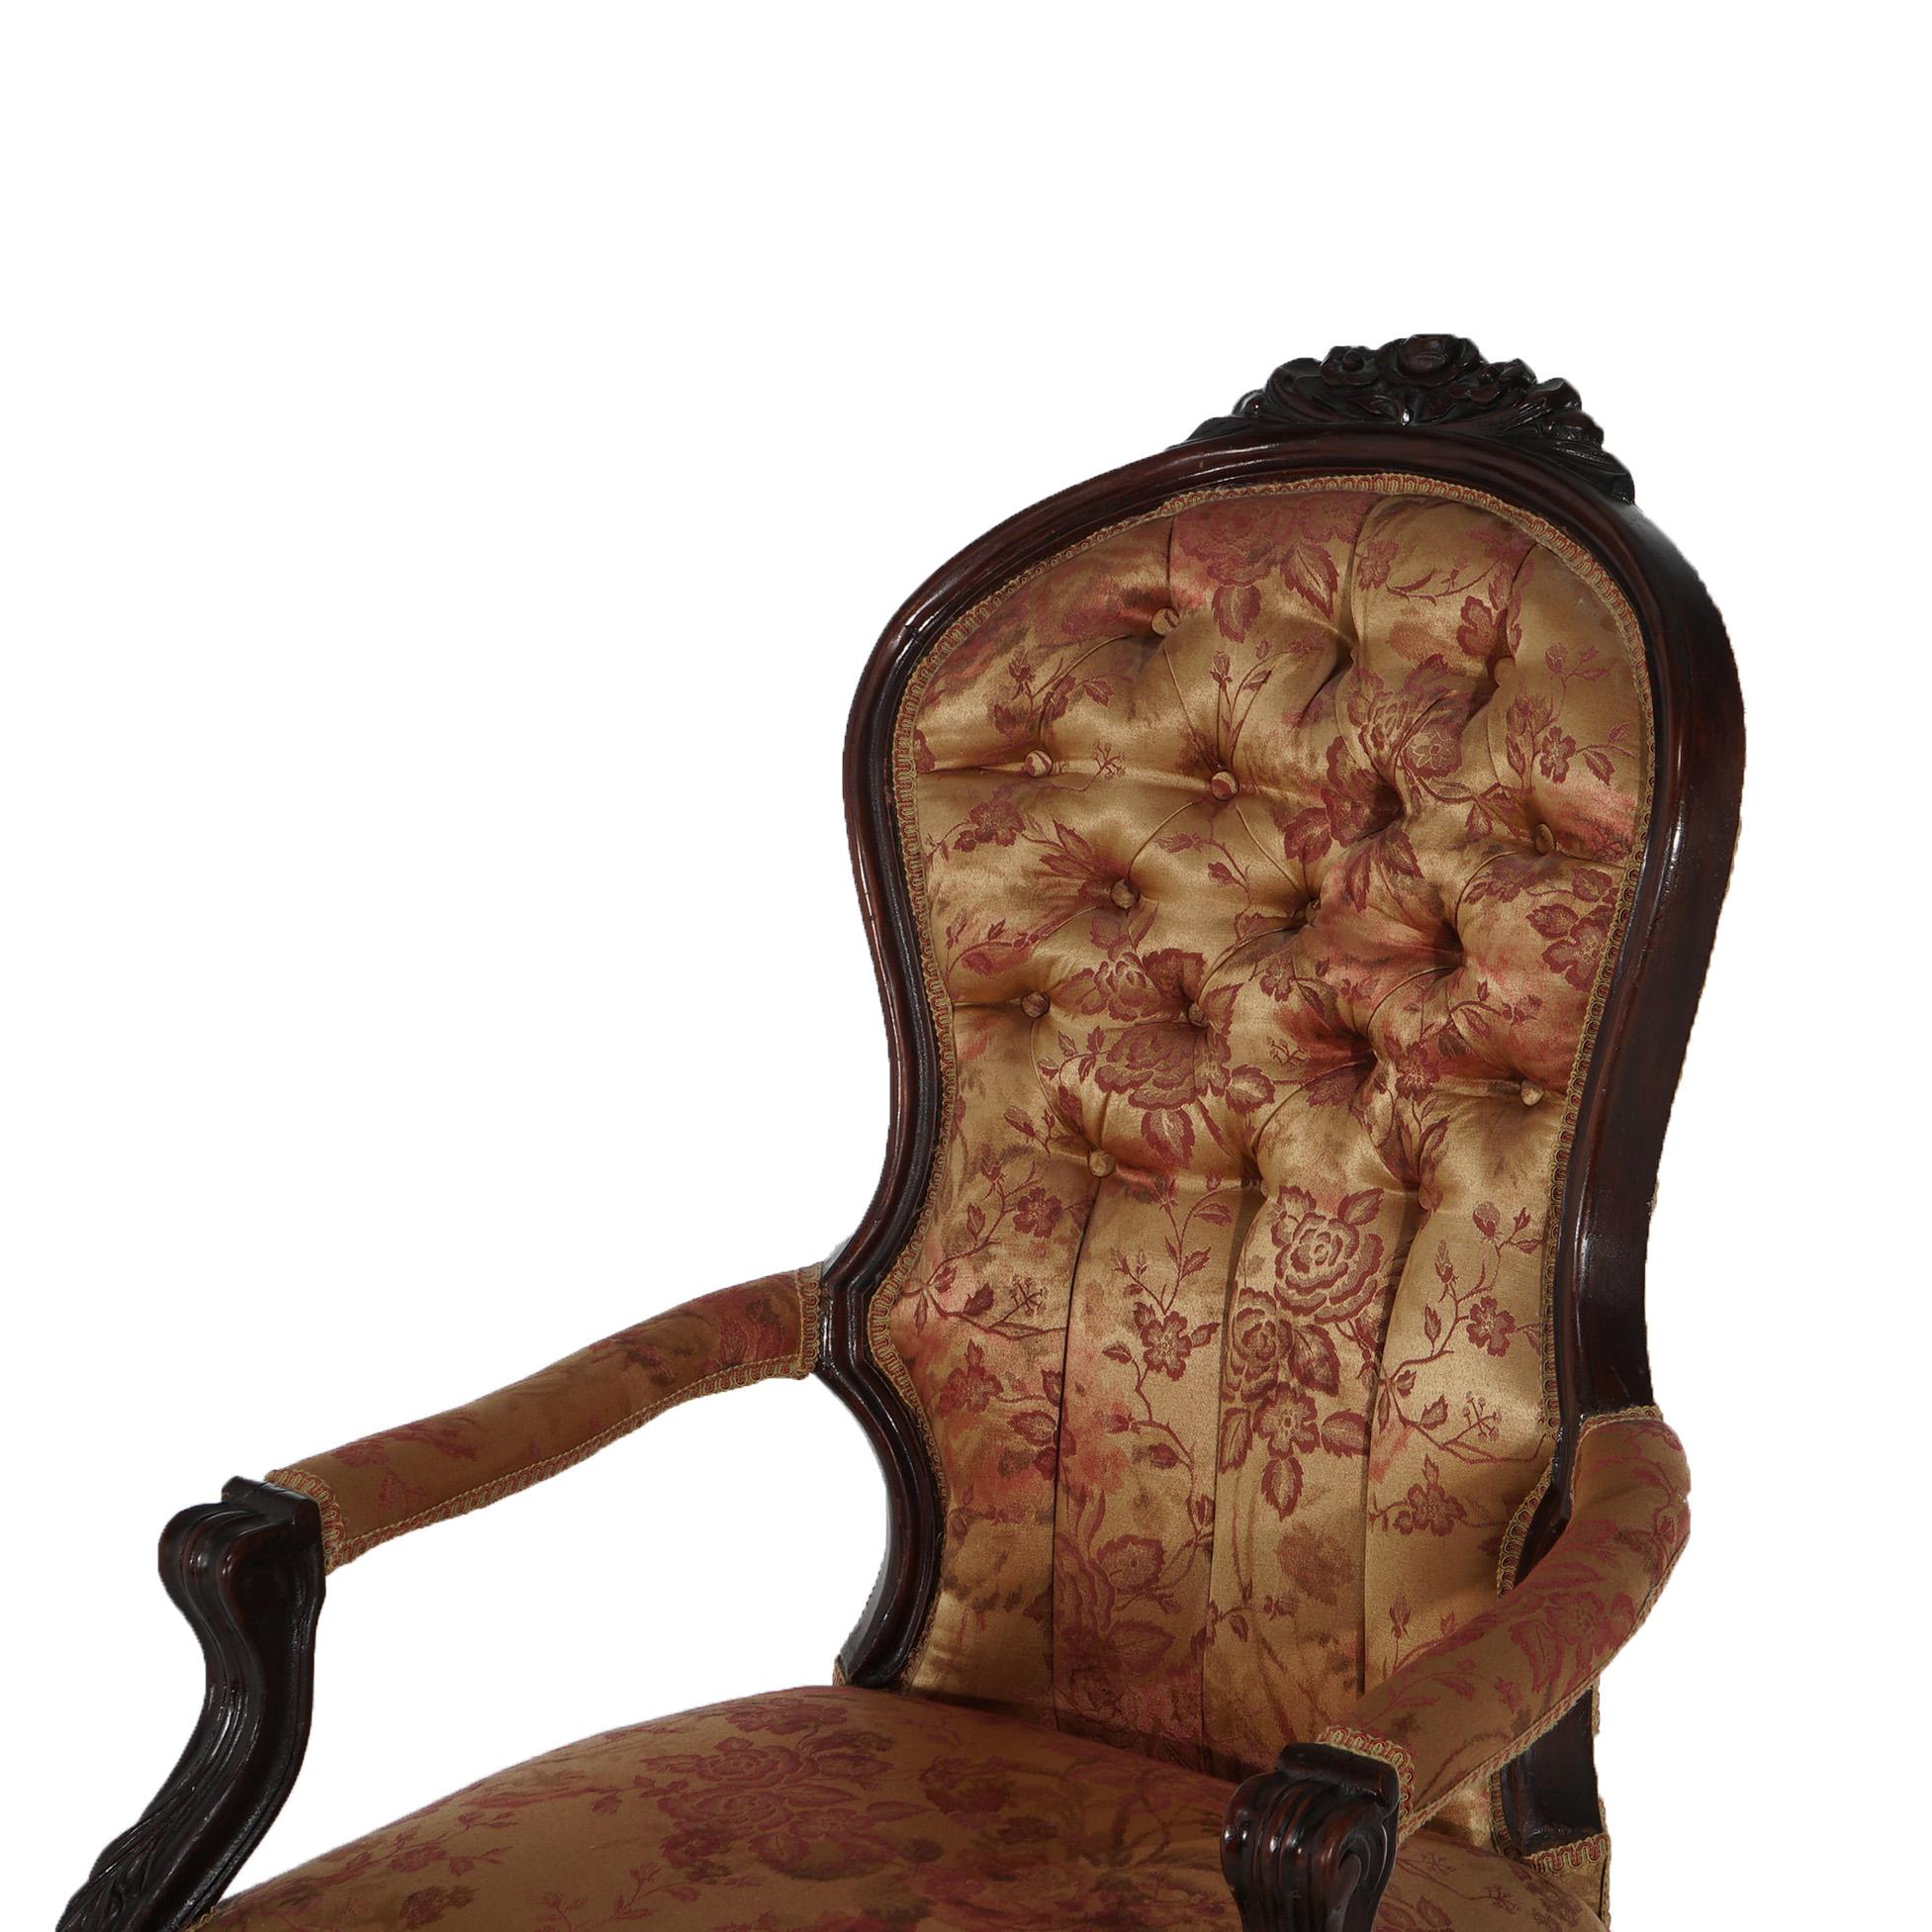 ***Ask About Reduced In-House Delivery Rates - Reliable Professional Service & Fully Insured***
Antique Victorian Carved Walnut Upholstered Button-Back Gentleman’s Chair C1890

Measures - 44.25